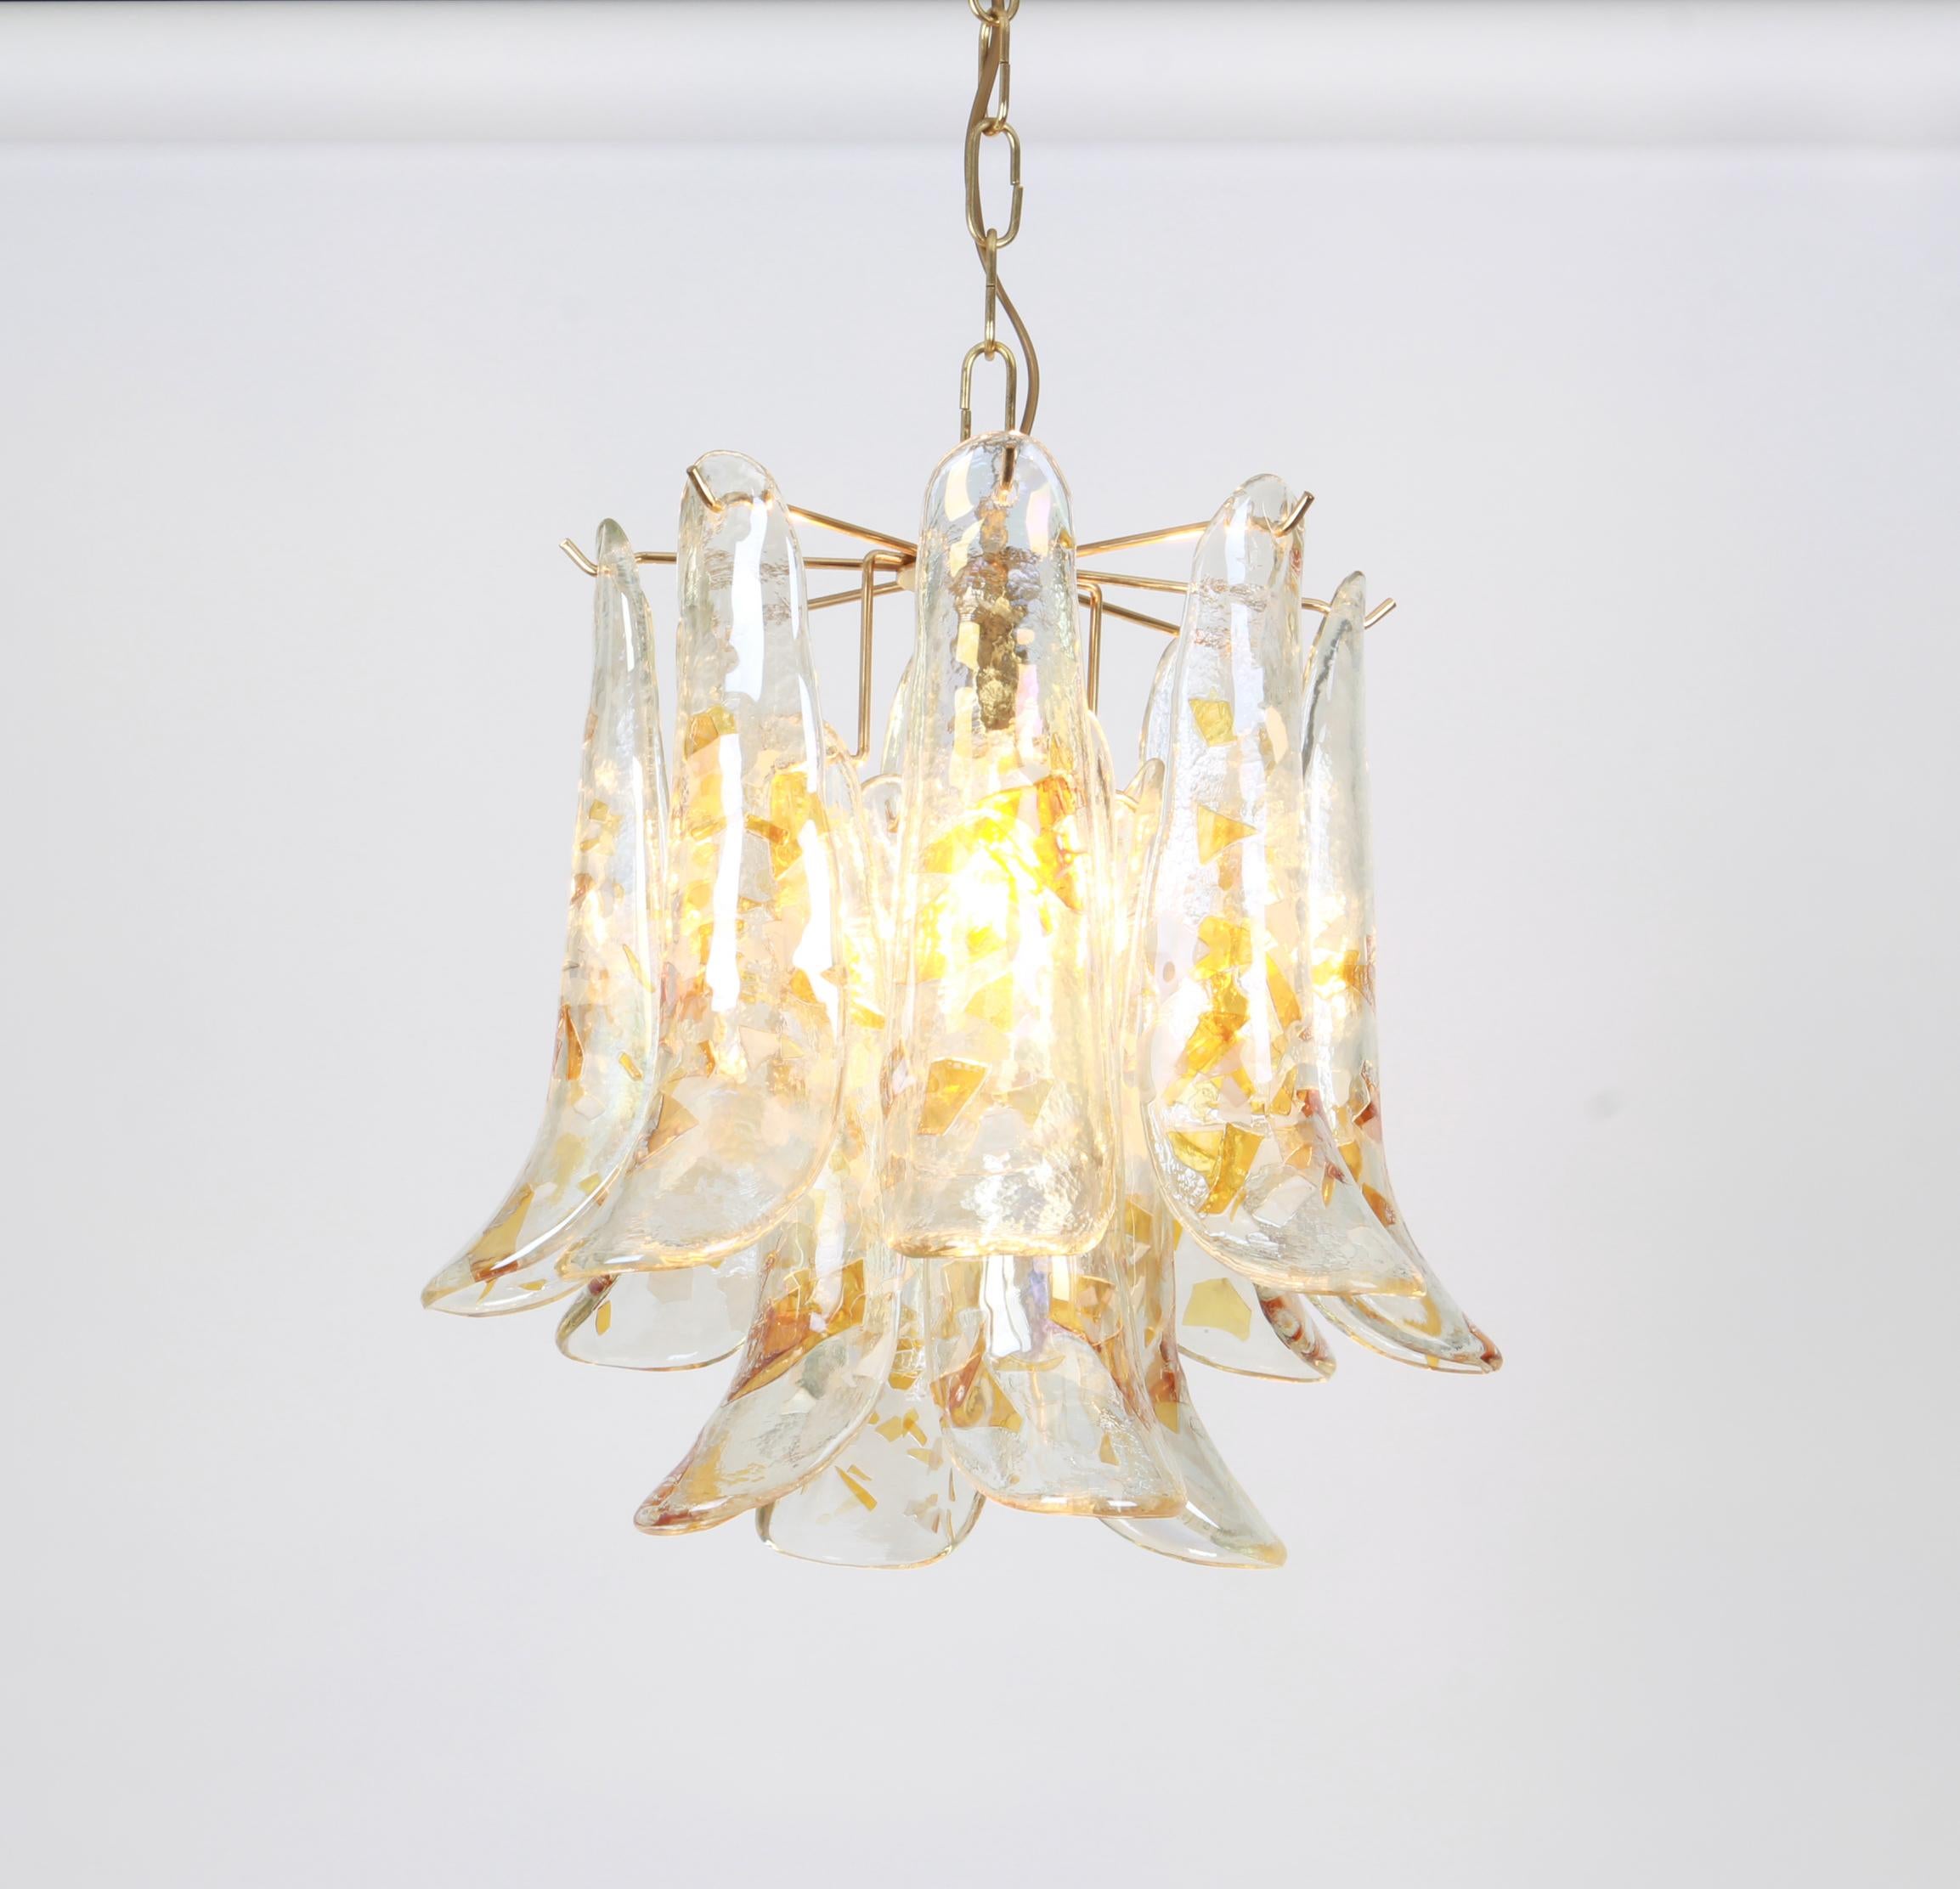 Late 20th Century Murano Glass Chandelier Designed by Carlo Nason for Mazzega, 1970s For Sale